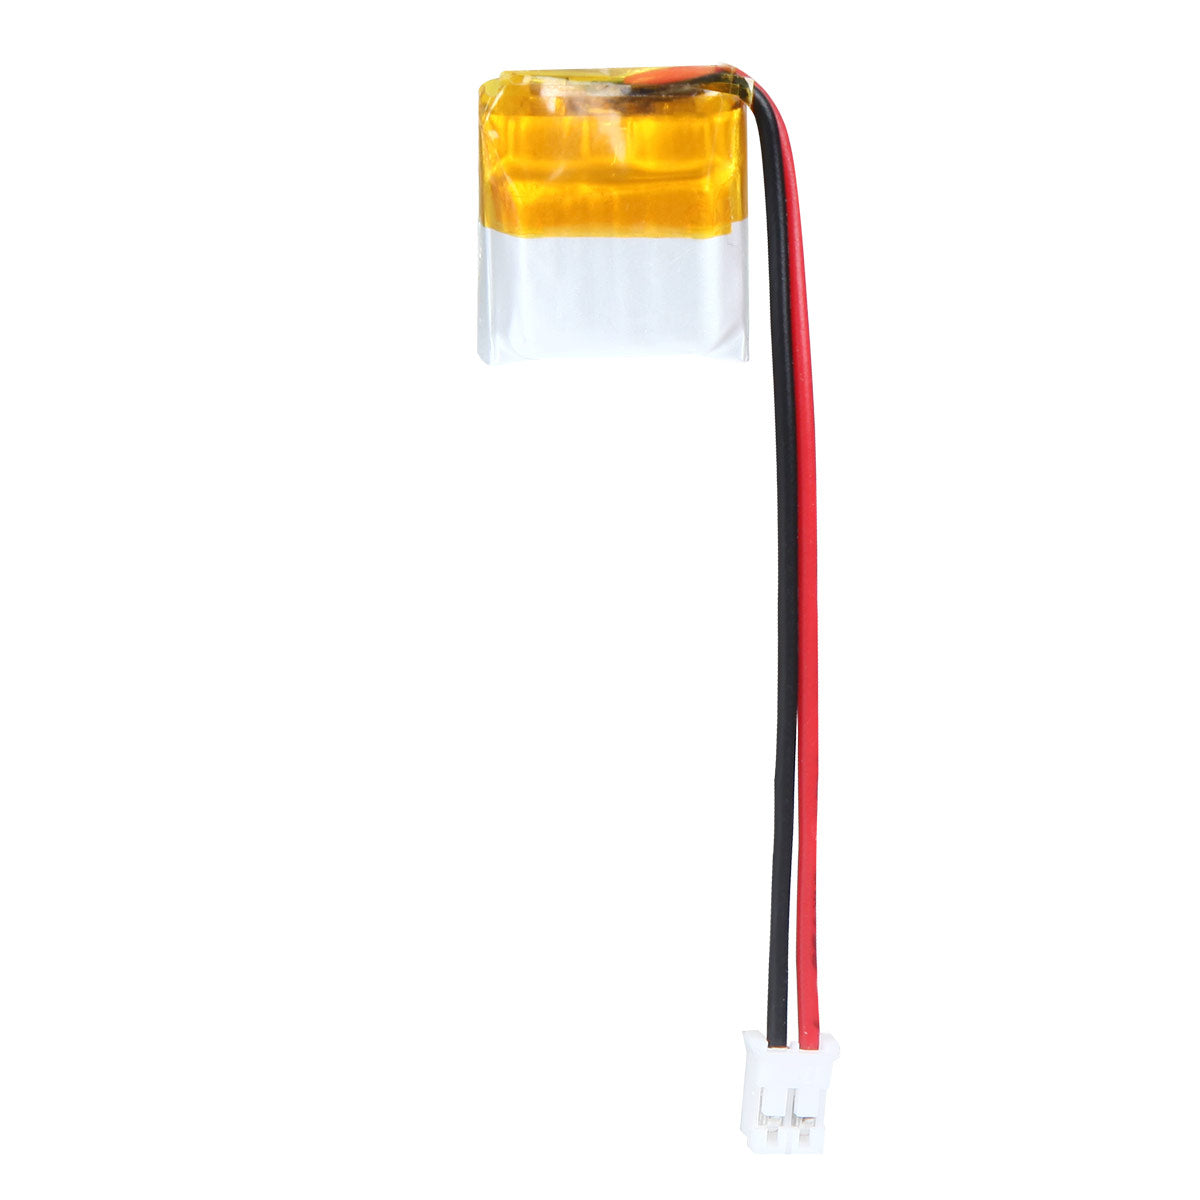 YDL 3.7V 75mAh 651417 Rechargeable Lithium  Polymer Battery